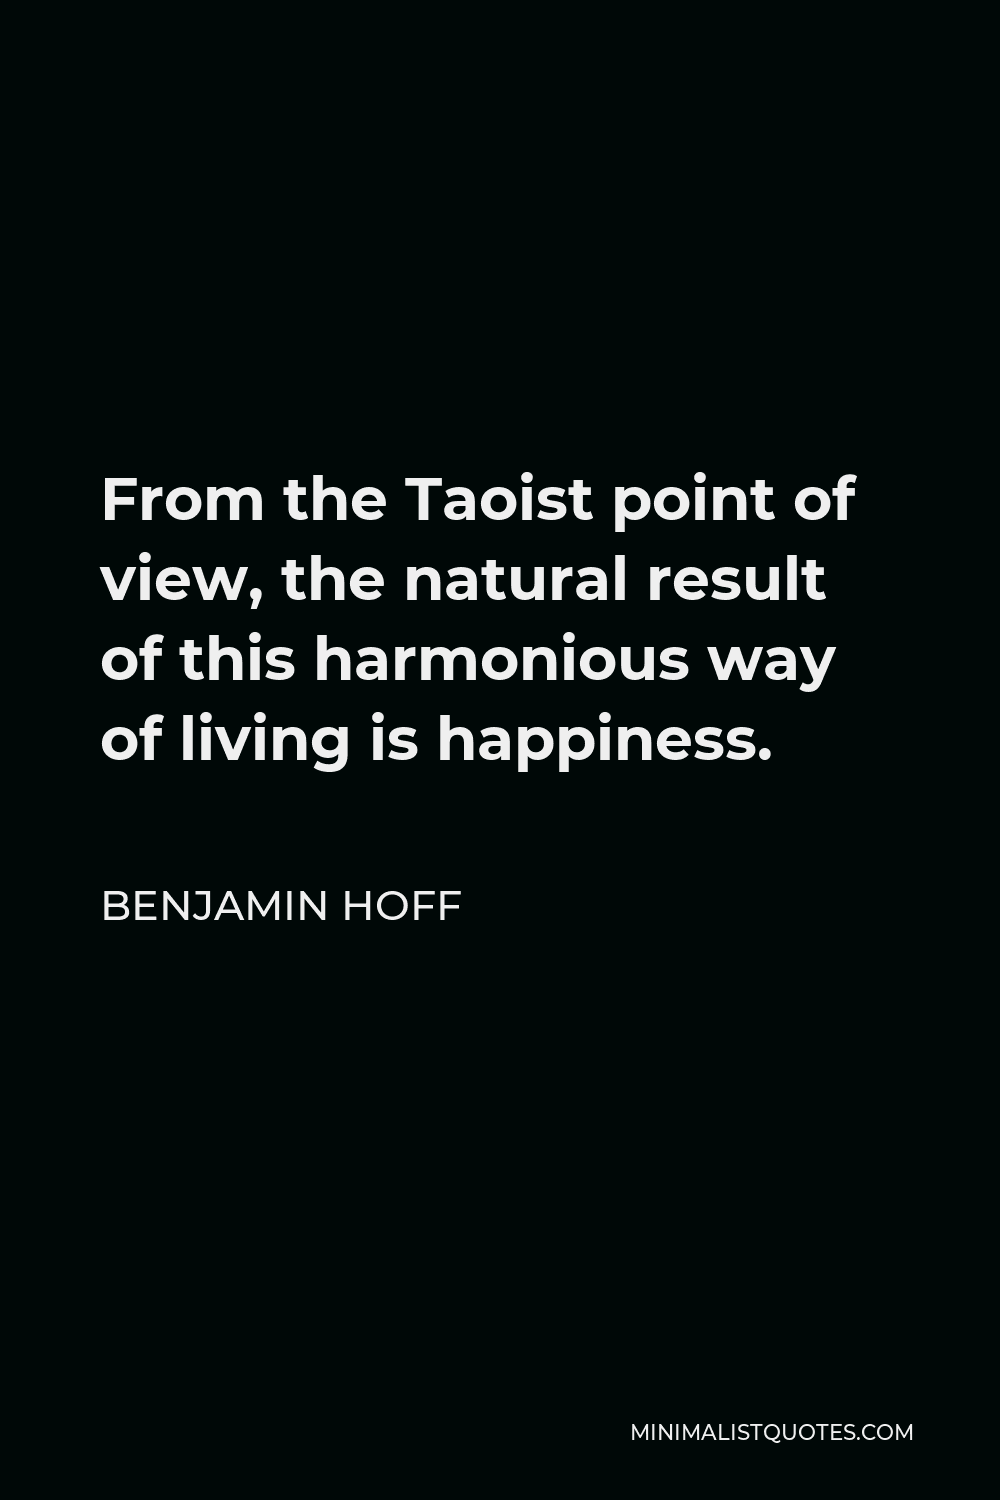 Benjamin Hoff Quote - From the Taoist point of view, the natural result of this harmonious way of living is happiness.